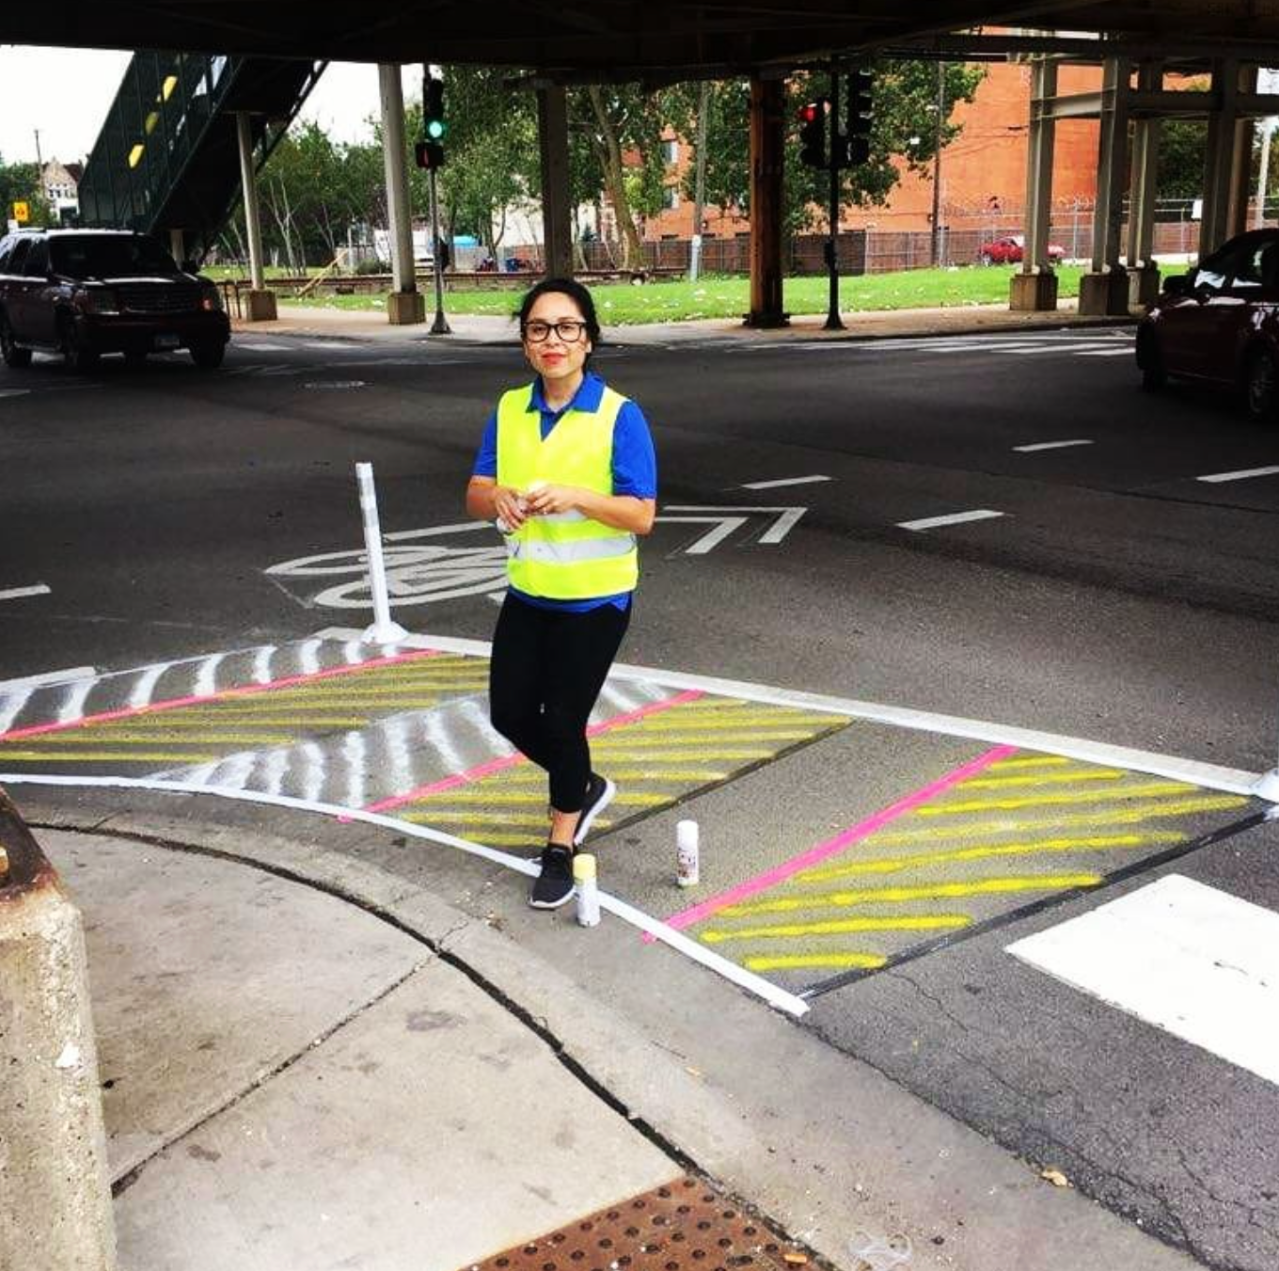 Romina Castillo helping visualize pedestrian friendly infrastructure. Photo: provided